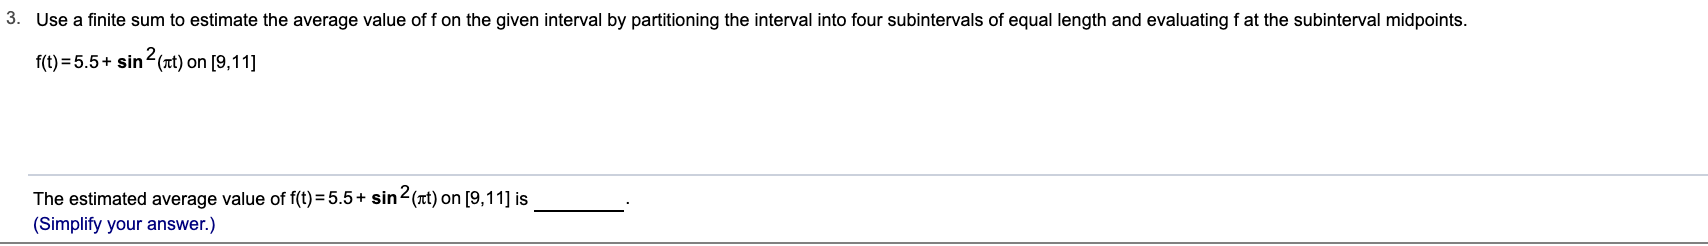 3. Use a finite sum to estimate the average value of f on the given interval by partitioning the interval into four subintervals of equal length and evaluating f at the subinterval midpoints.
f(t) = 5.5+ sin (Tt) on [9,11]
The estimated average value of f(t) = 5.5+ sin2(t) on [9,11] is
(Simplify your answer.)
